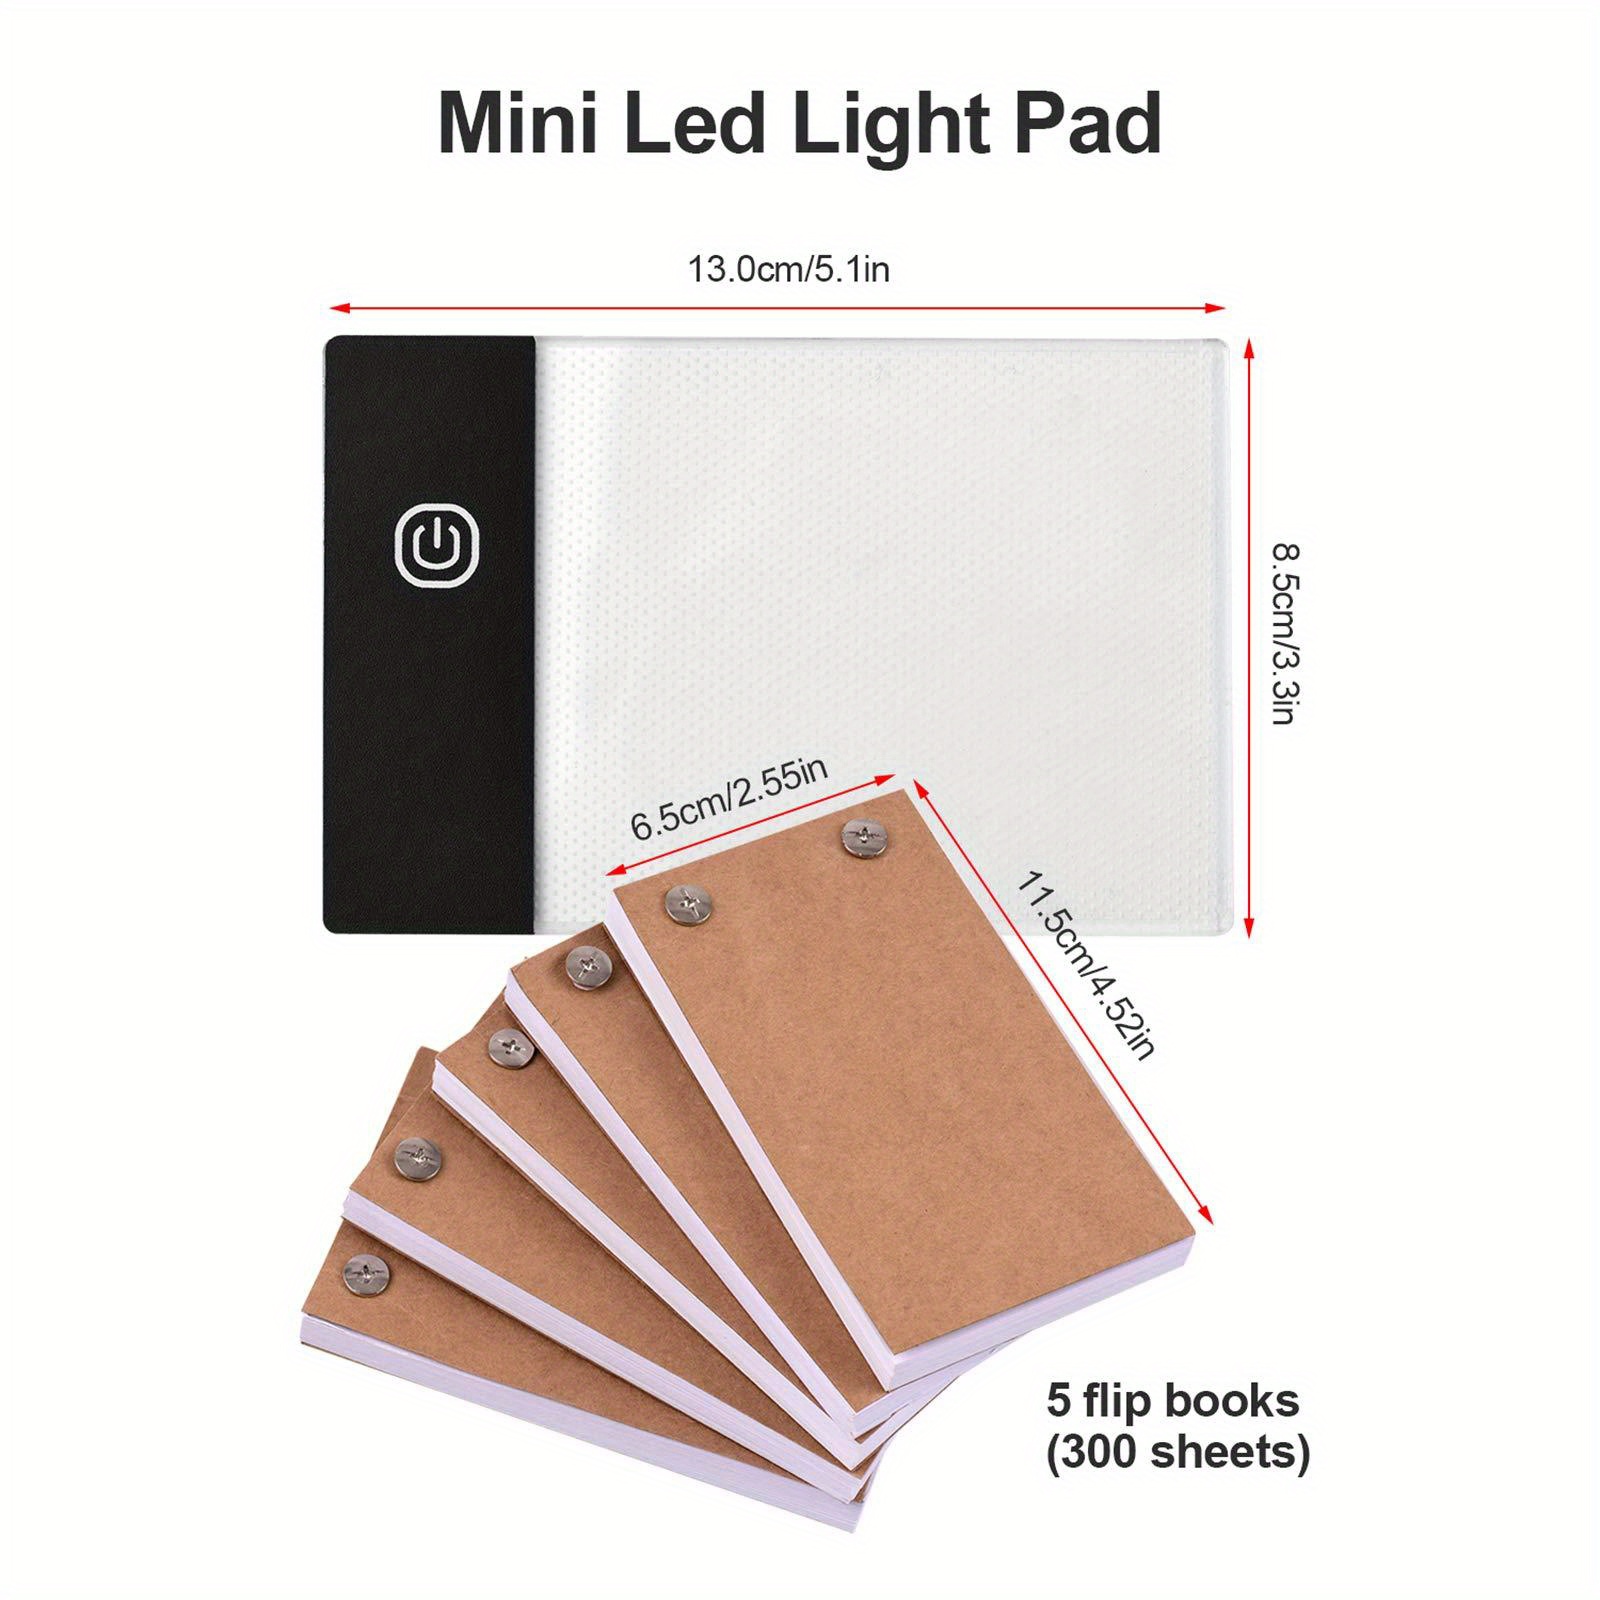  Flip Book Kit with A4 Light Pad - Includes 240 Sheets